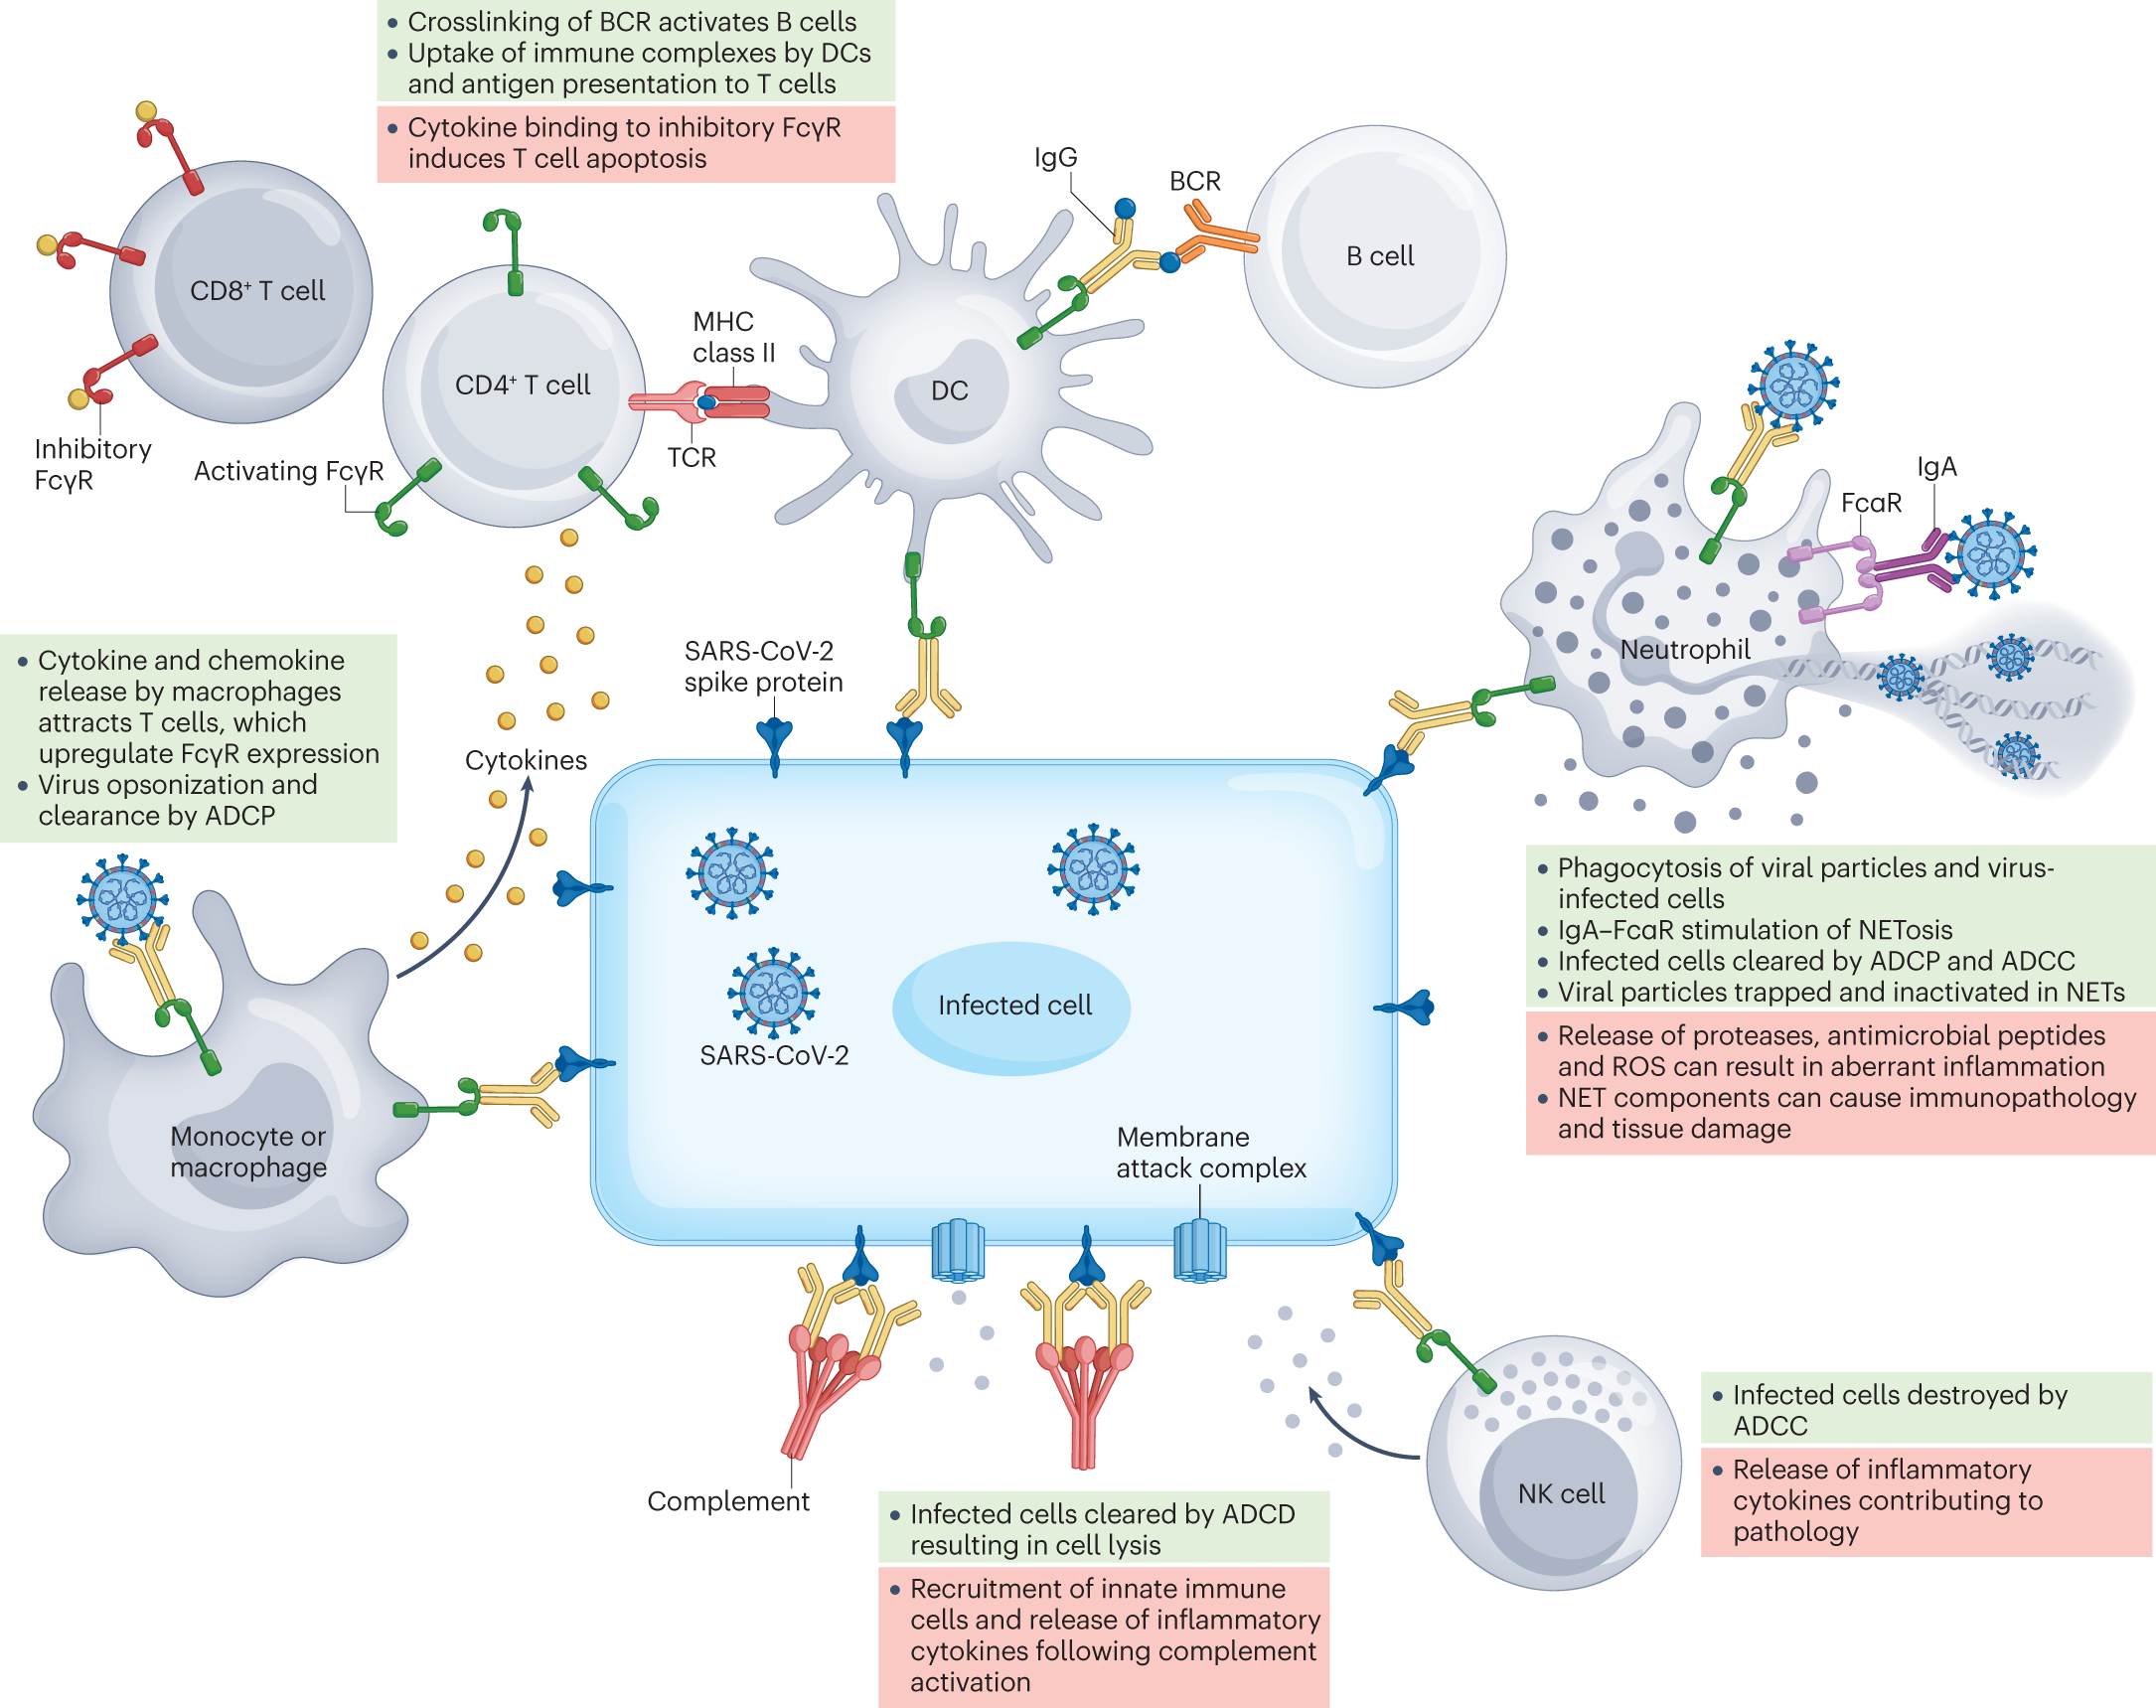 Characterization and immune regulation role of an immobilization